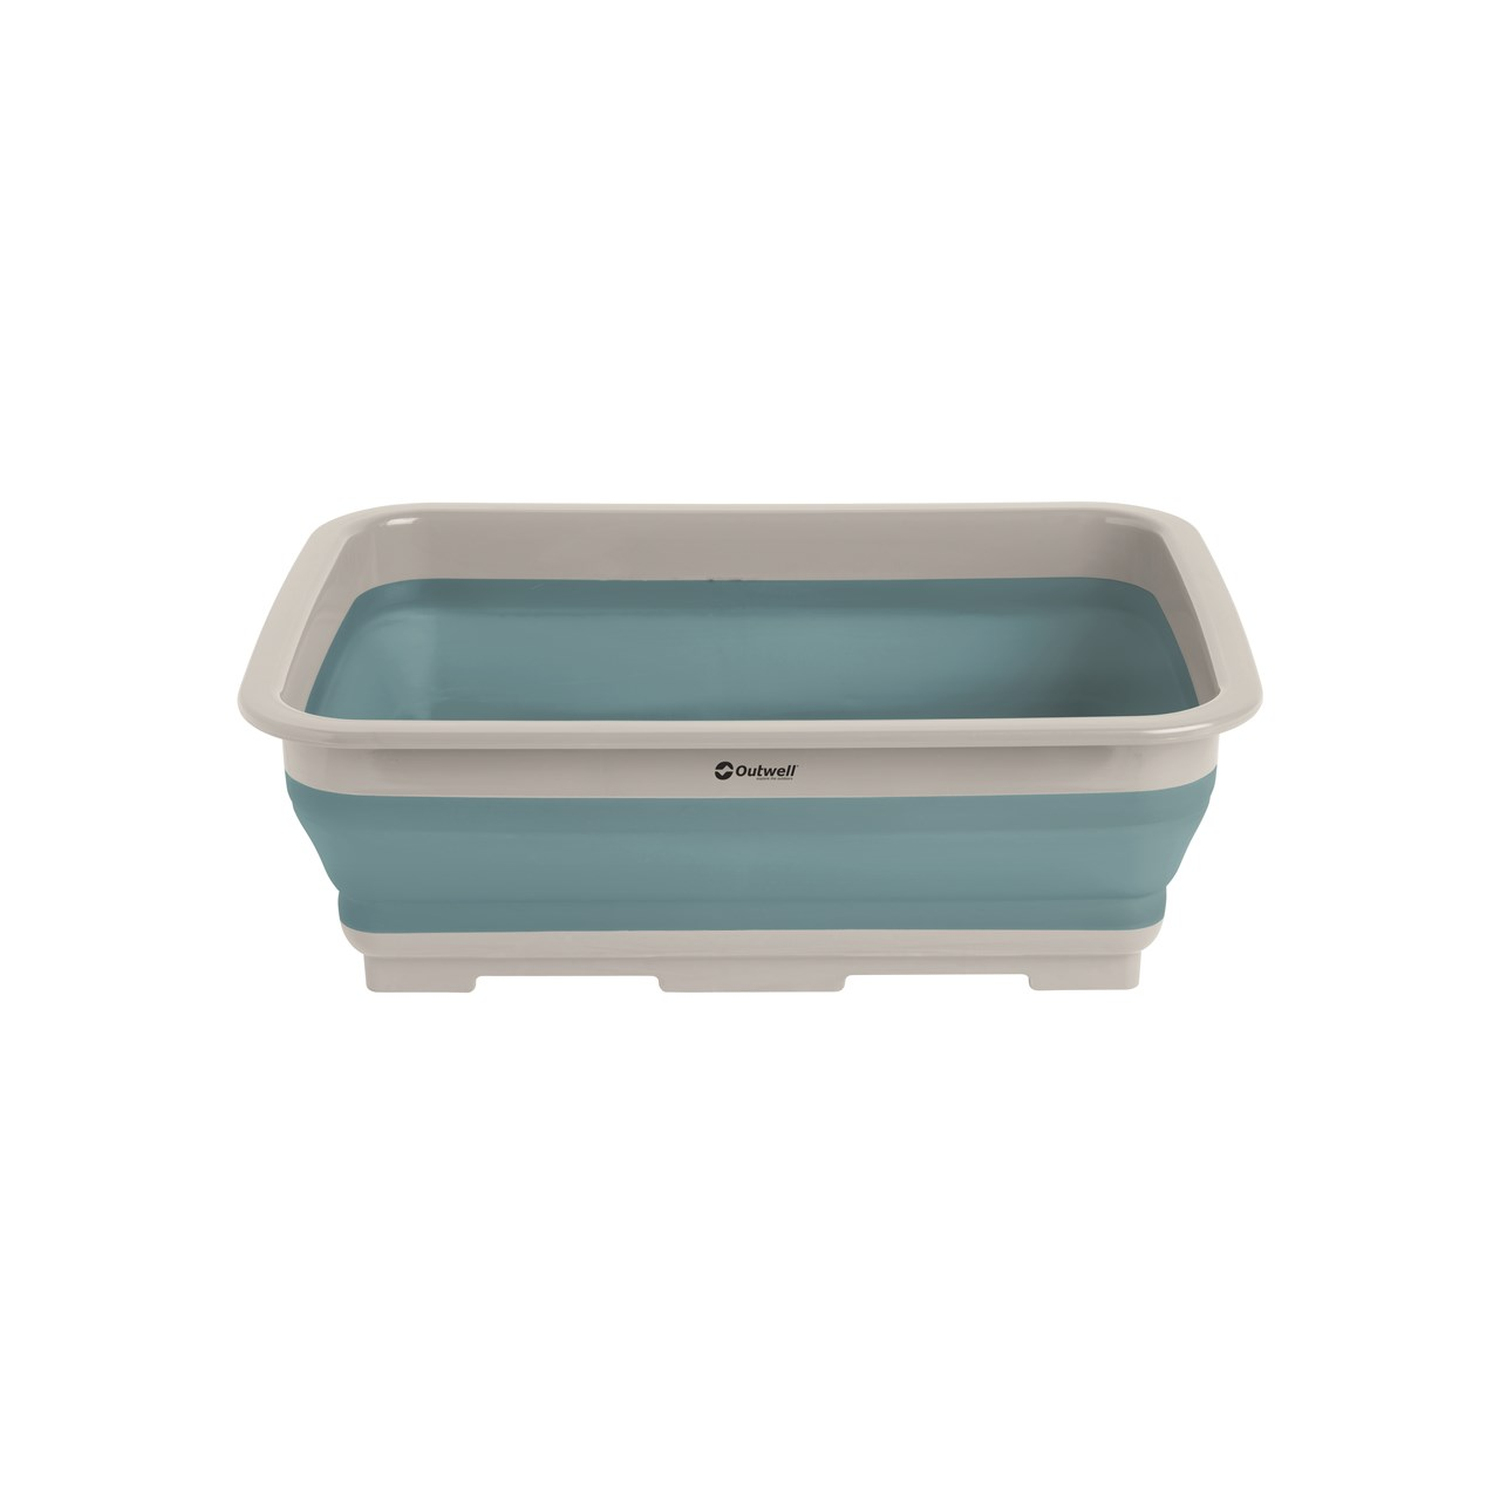 Outwell Collaps Wash Bowl classic blue